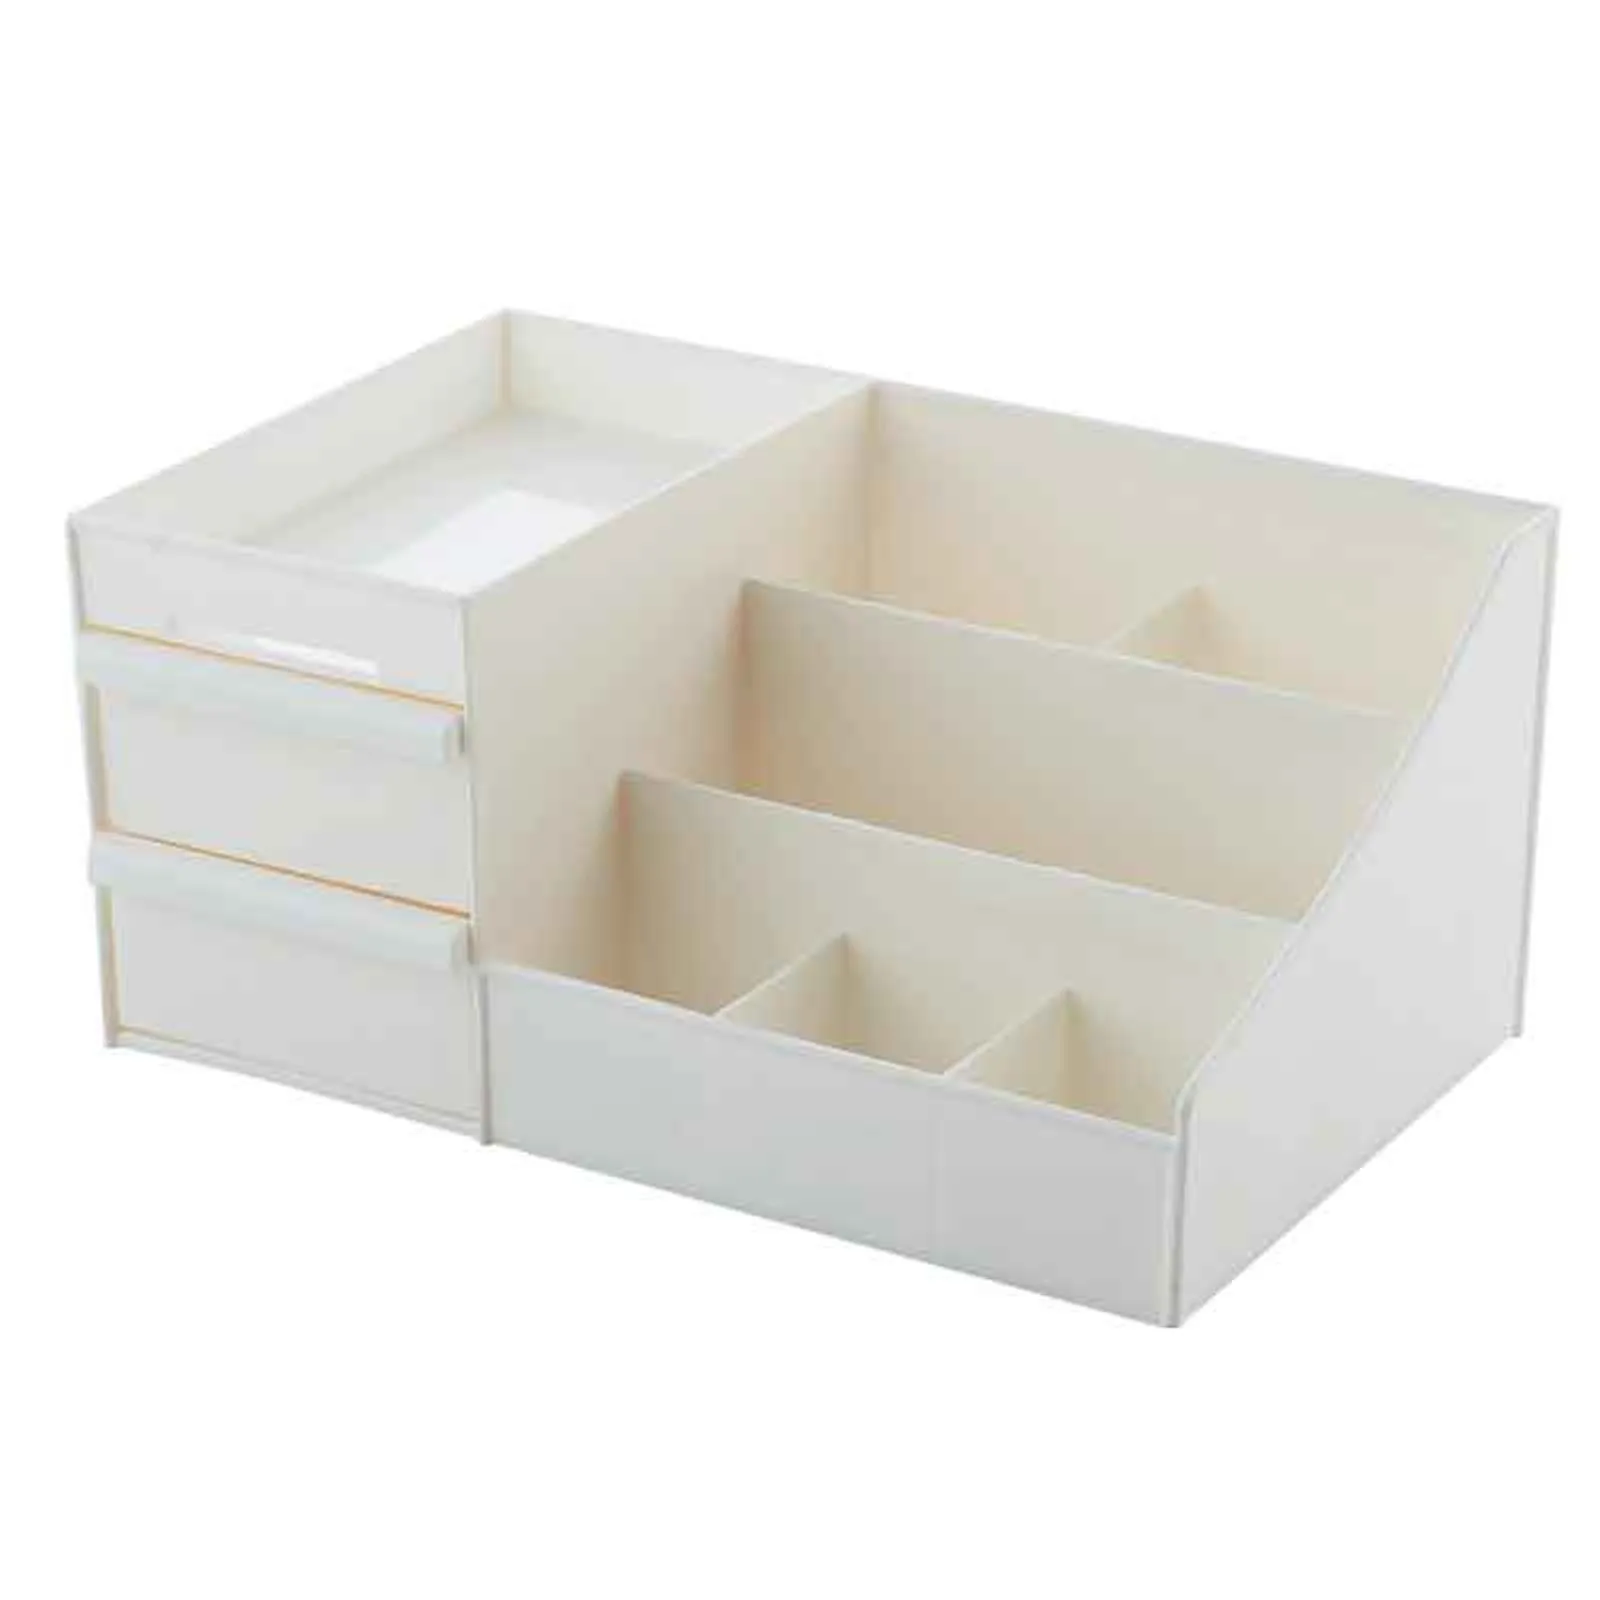 Makeup Organizer for Cosmetic Large Capacity Cosmetic Storage Box Organizer Desktop Jewelry Nail Polish Makeup Drawer Container